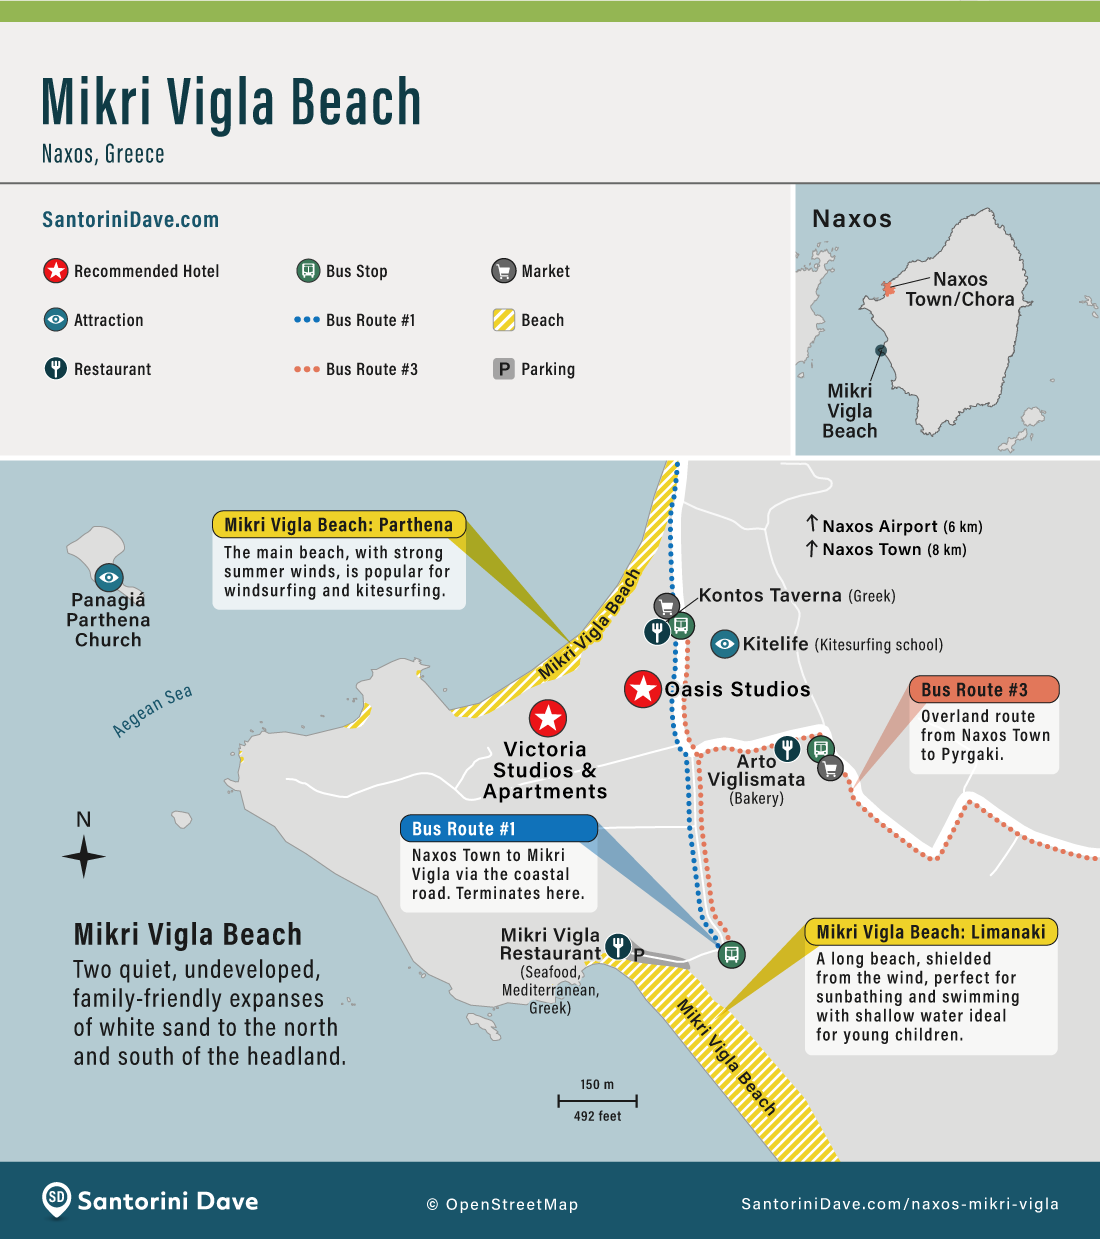 Map showing the location, amenities, hotels, and restaurants at Mikri Vigla Beach on Naxos.